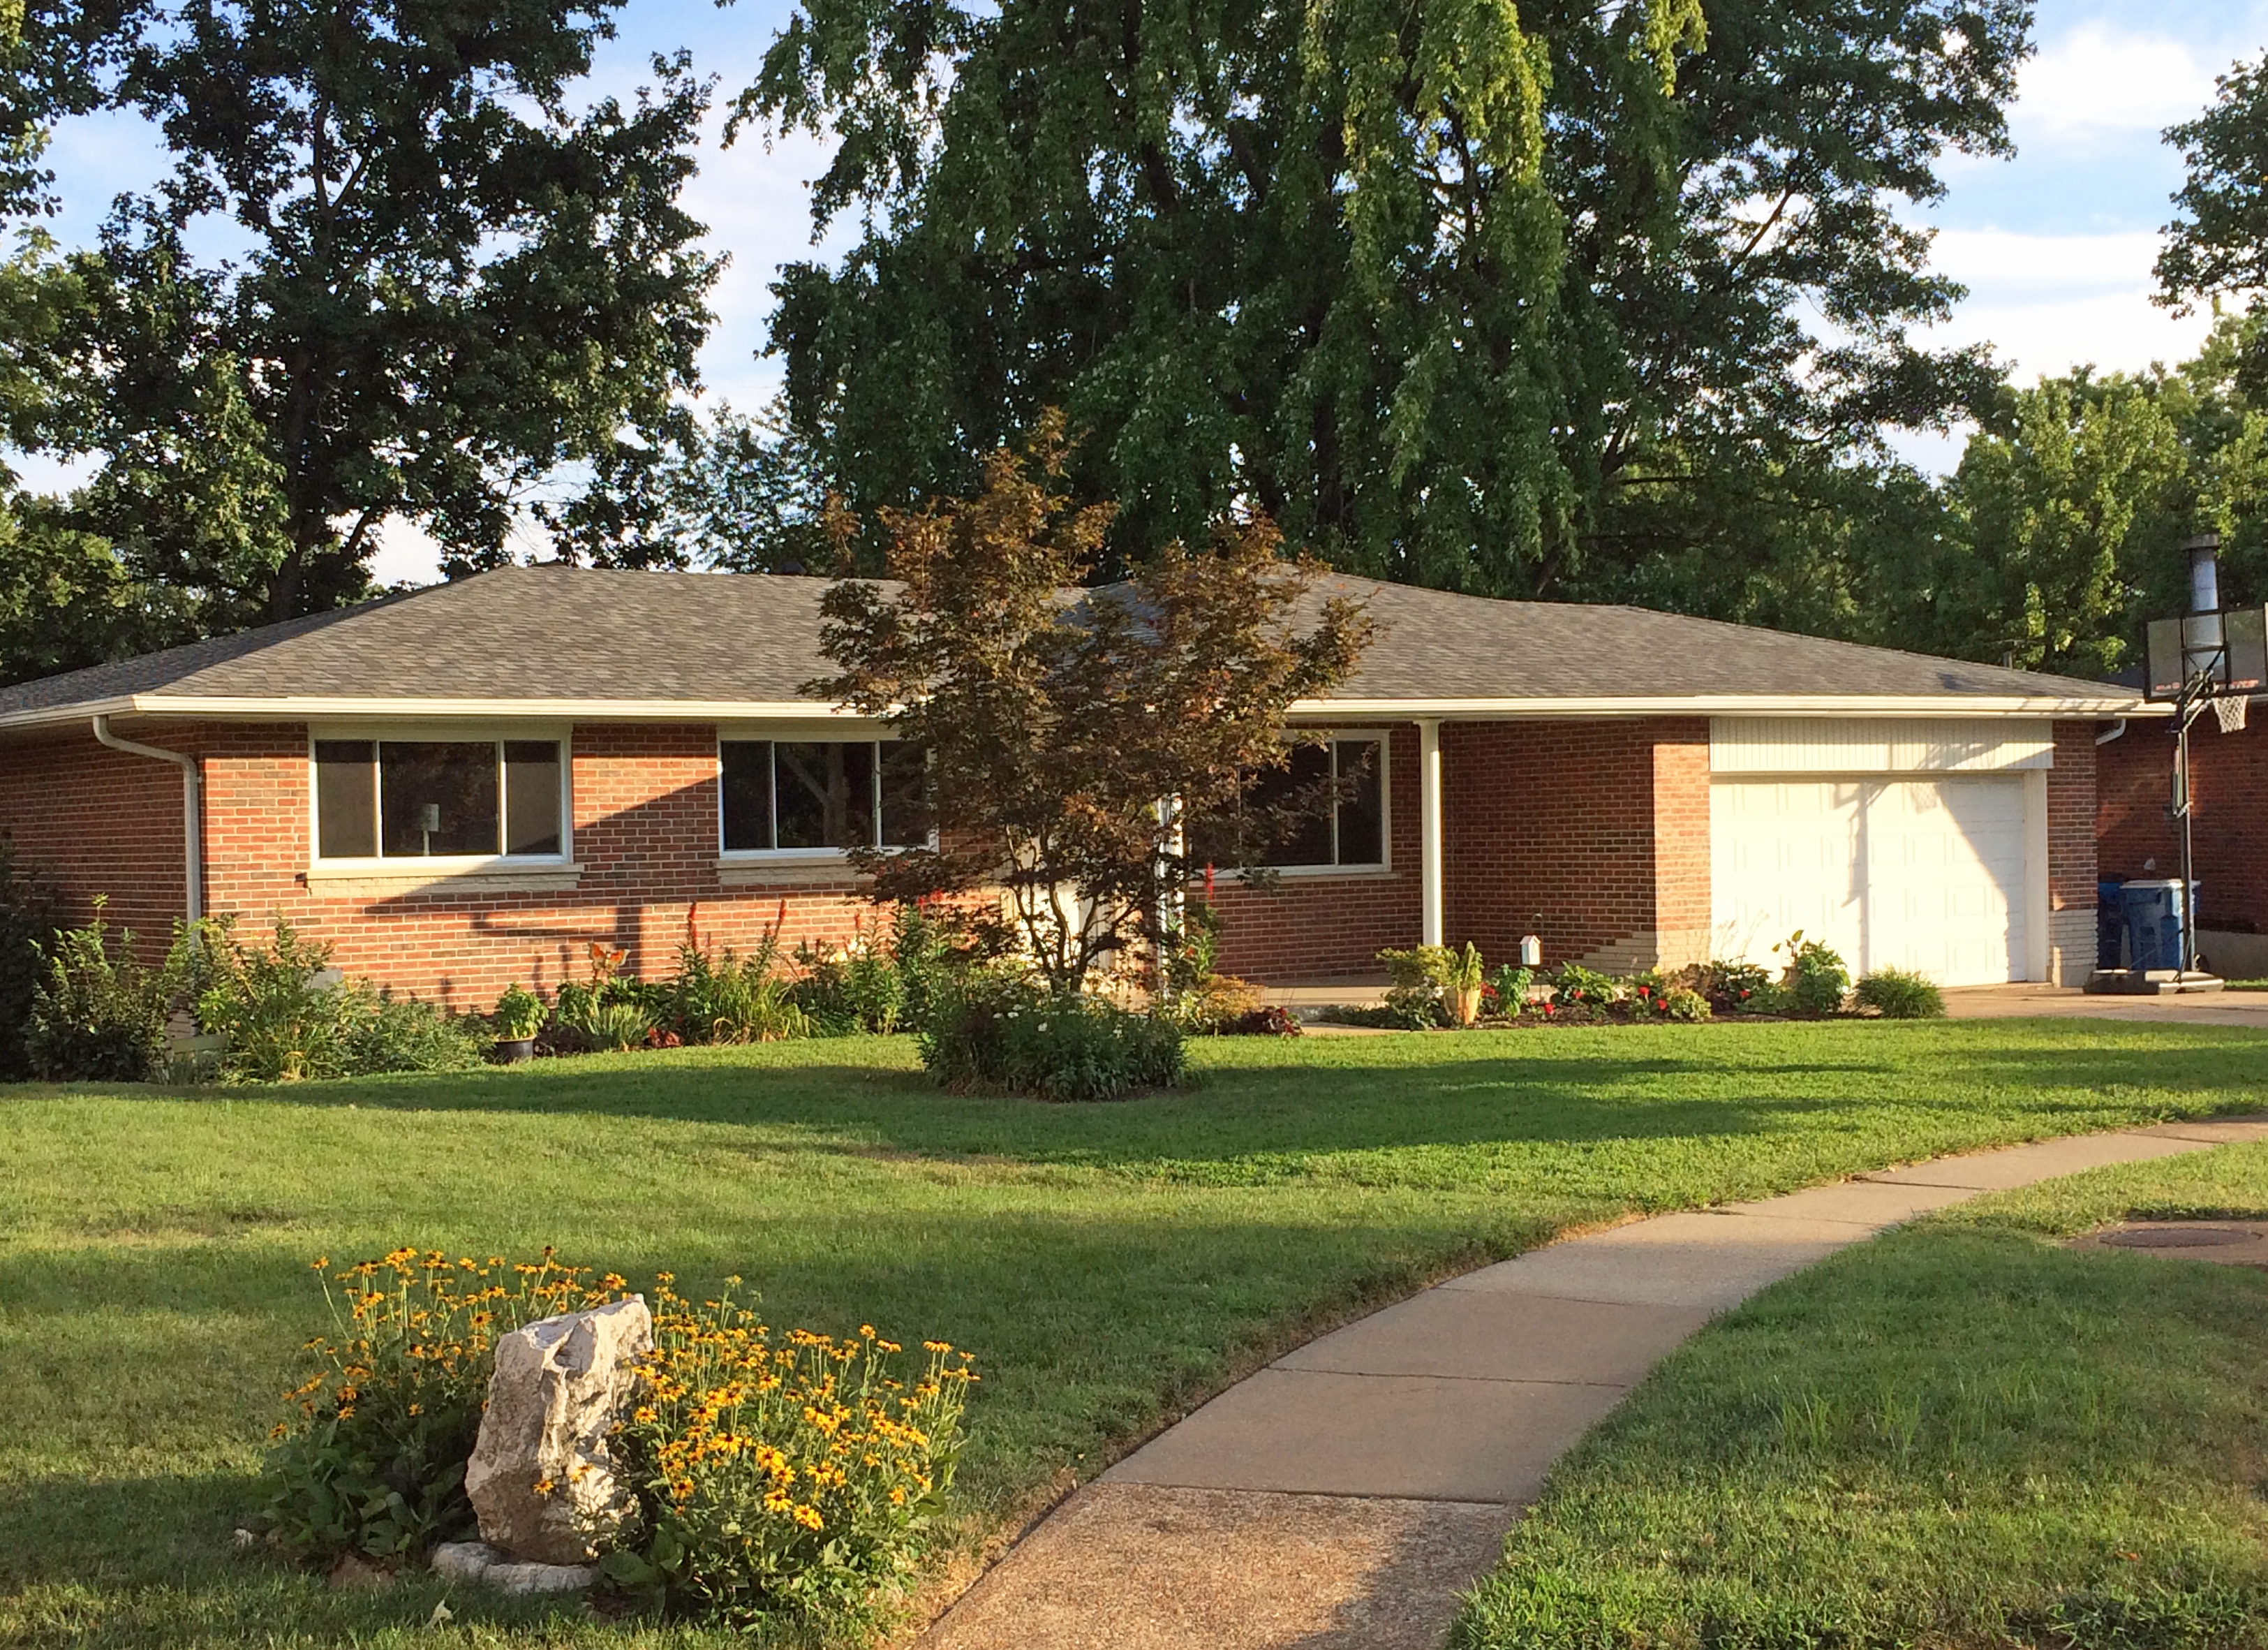 Brand New Listing in St Louis County - Affton Schools!